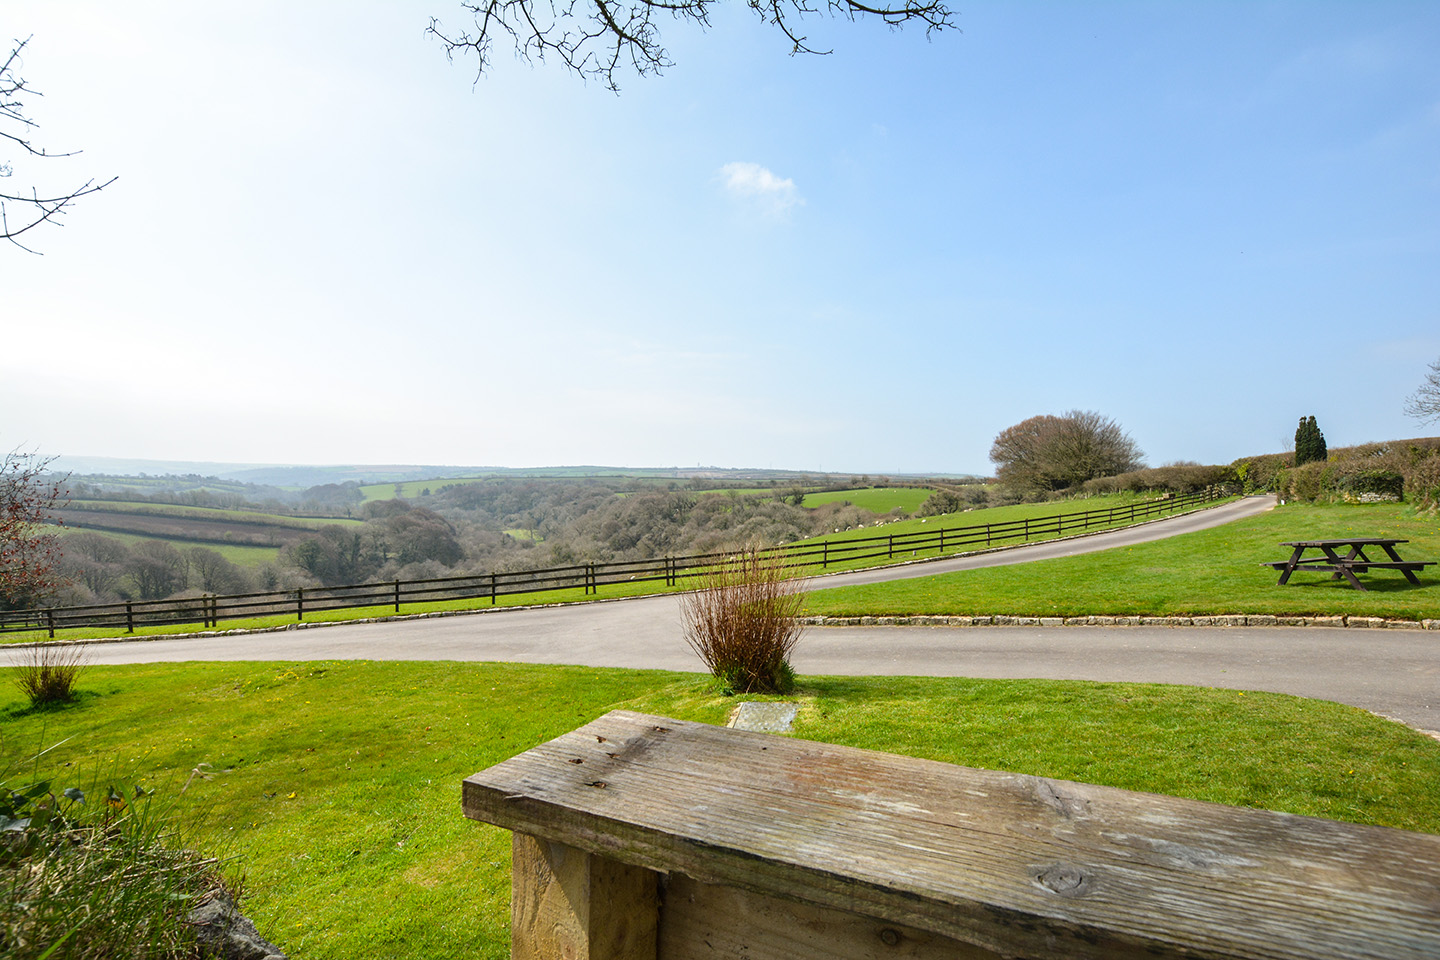 The view from Jingles luxury self catering holiday cottage at Penrose Burden in North Cornwall near Bodmin Moor.jpg